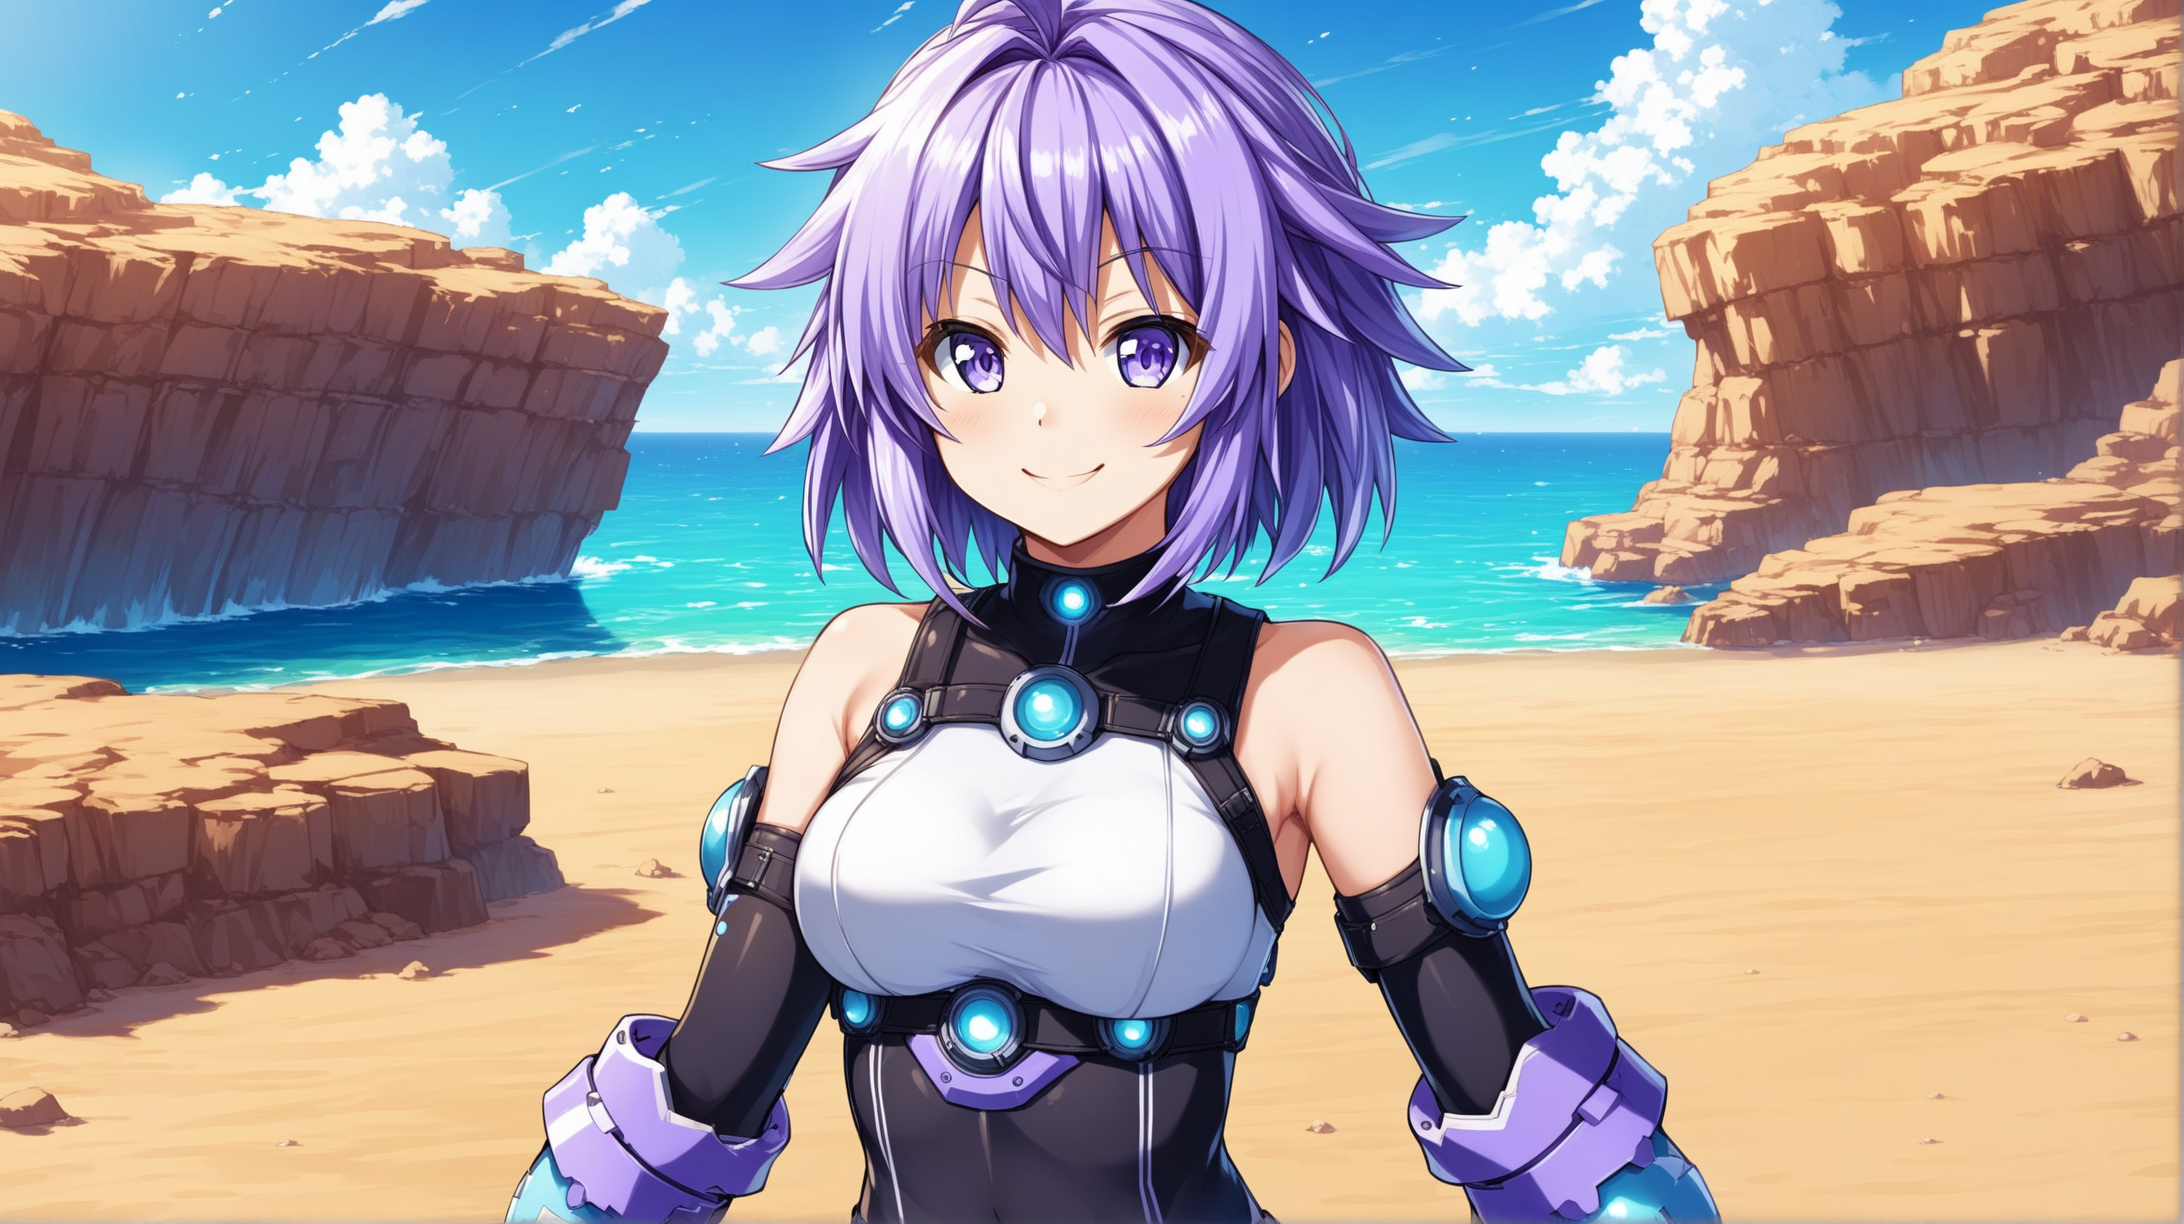 Draw the Hyperdimension Neptunia character Neptune, high quality, with short hair, in a relaxed pose, outdoors, wearing an outfit inspired from the Fallout series, smiling at the viewer